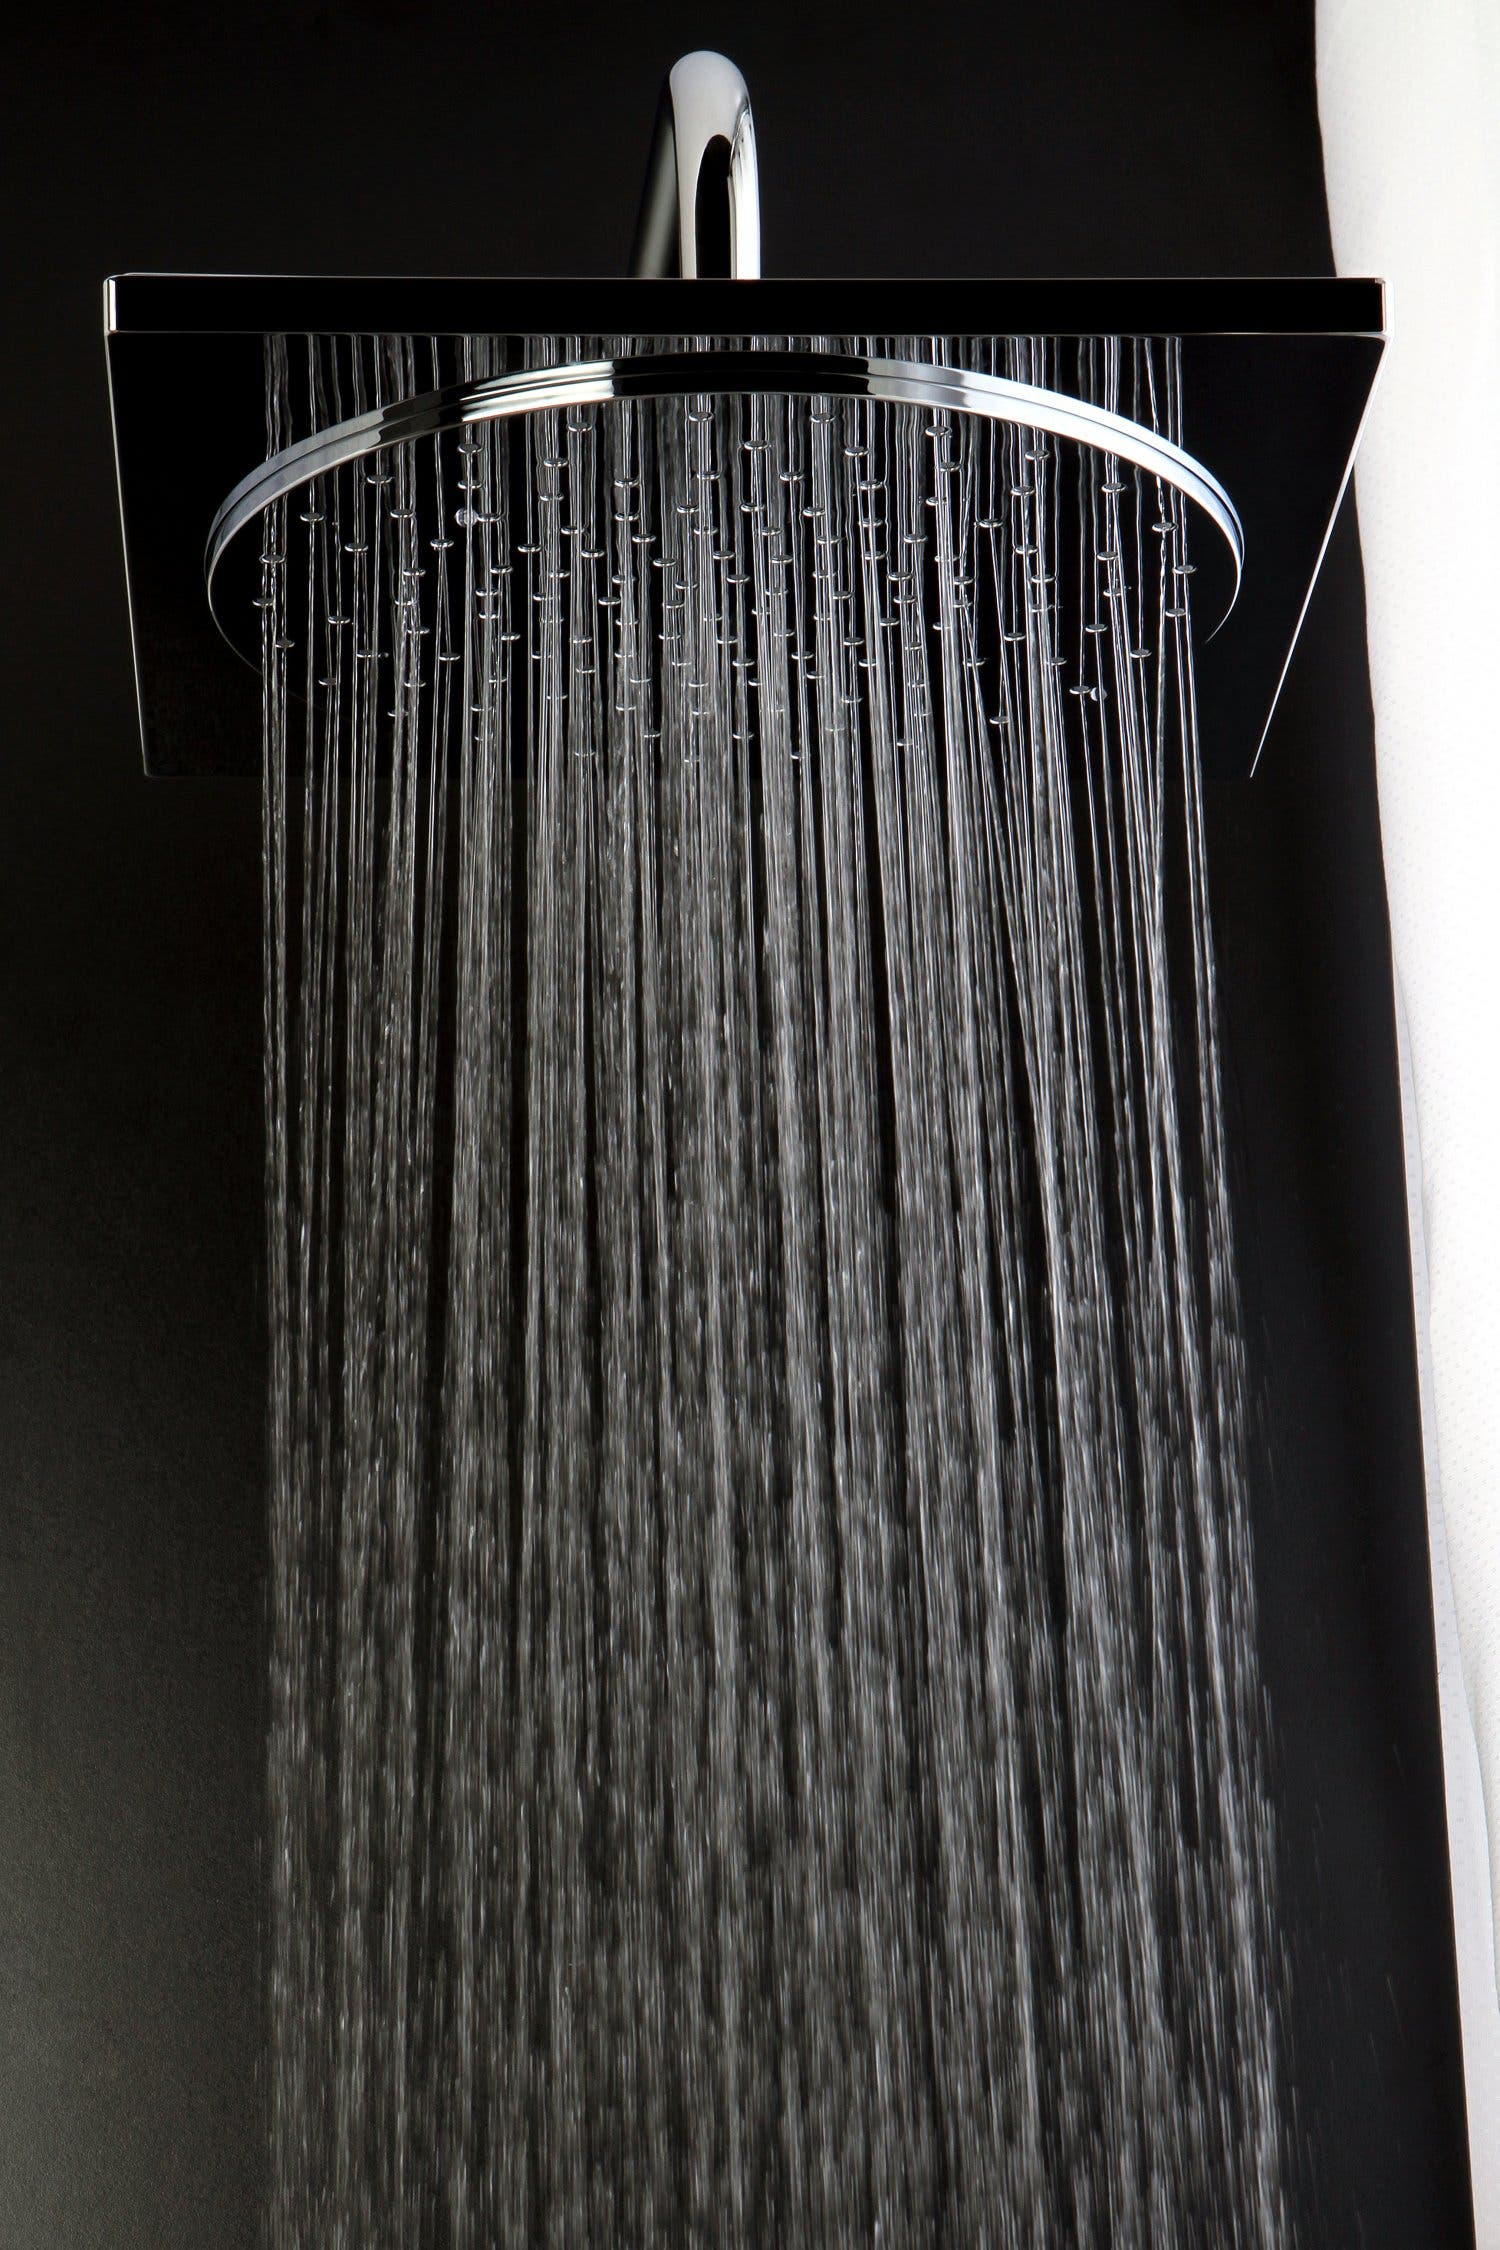 Clear Your Head with the Claremont Rain Showerhead, KX8221